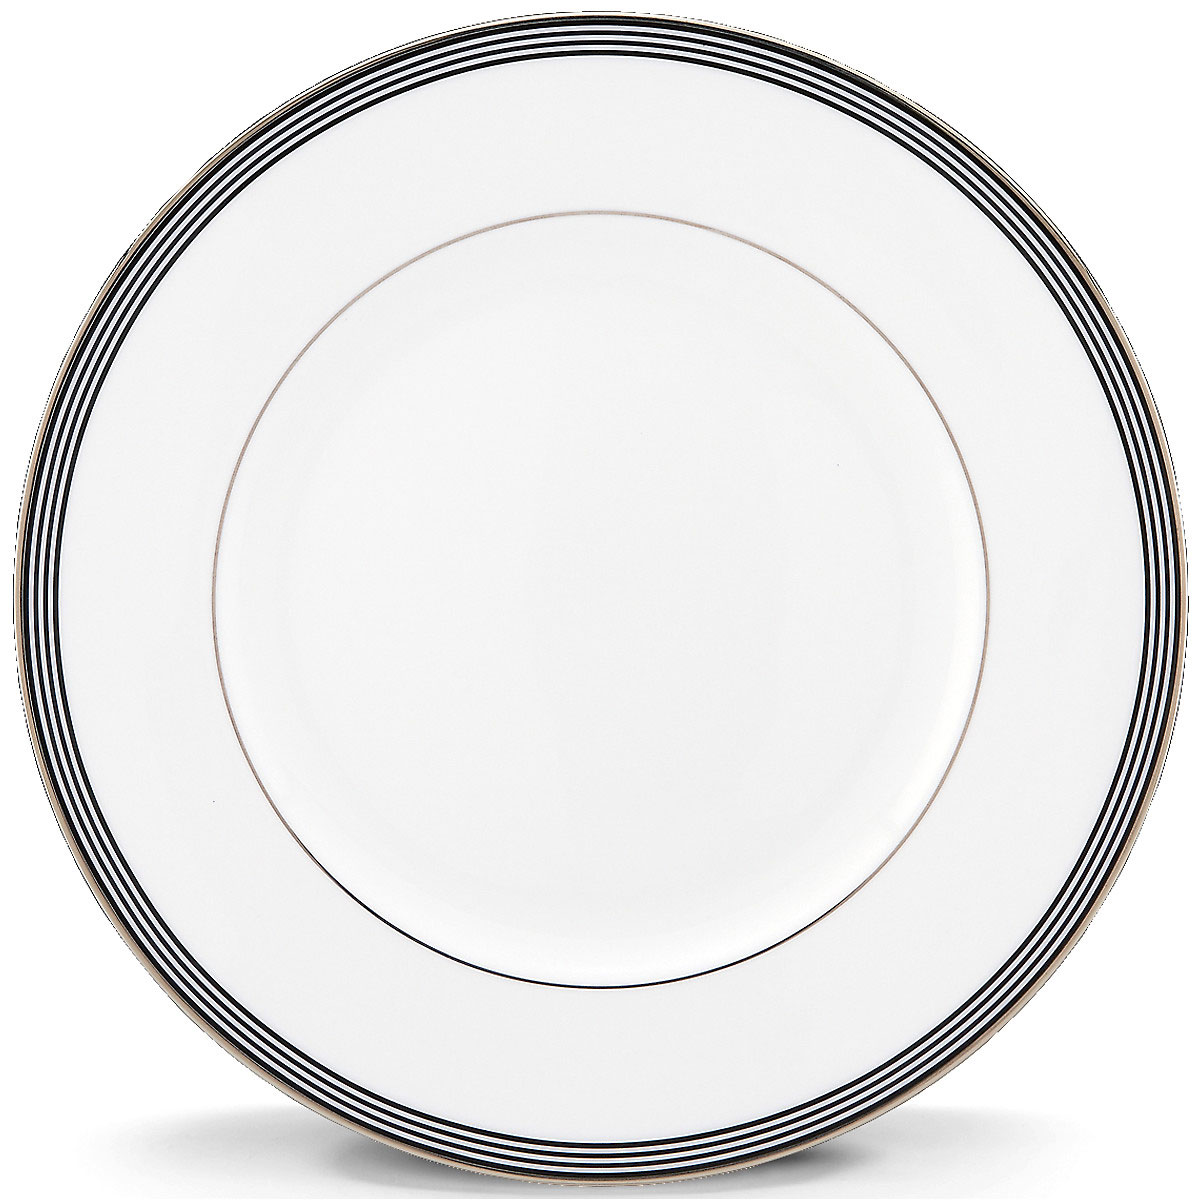 Kate Spade China by Lenox, Parker Place Dinner Plate